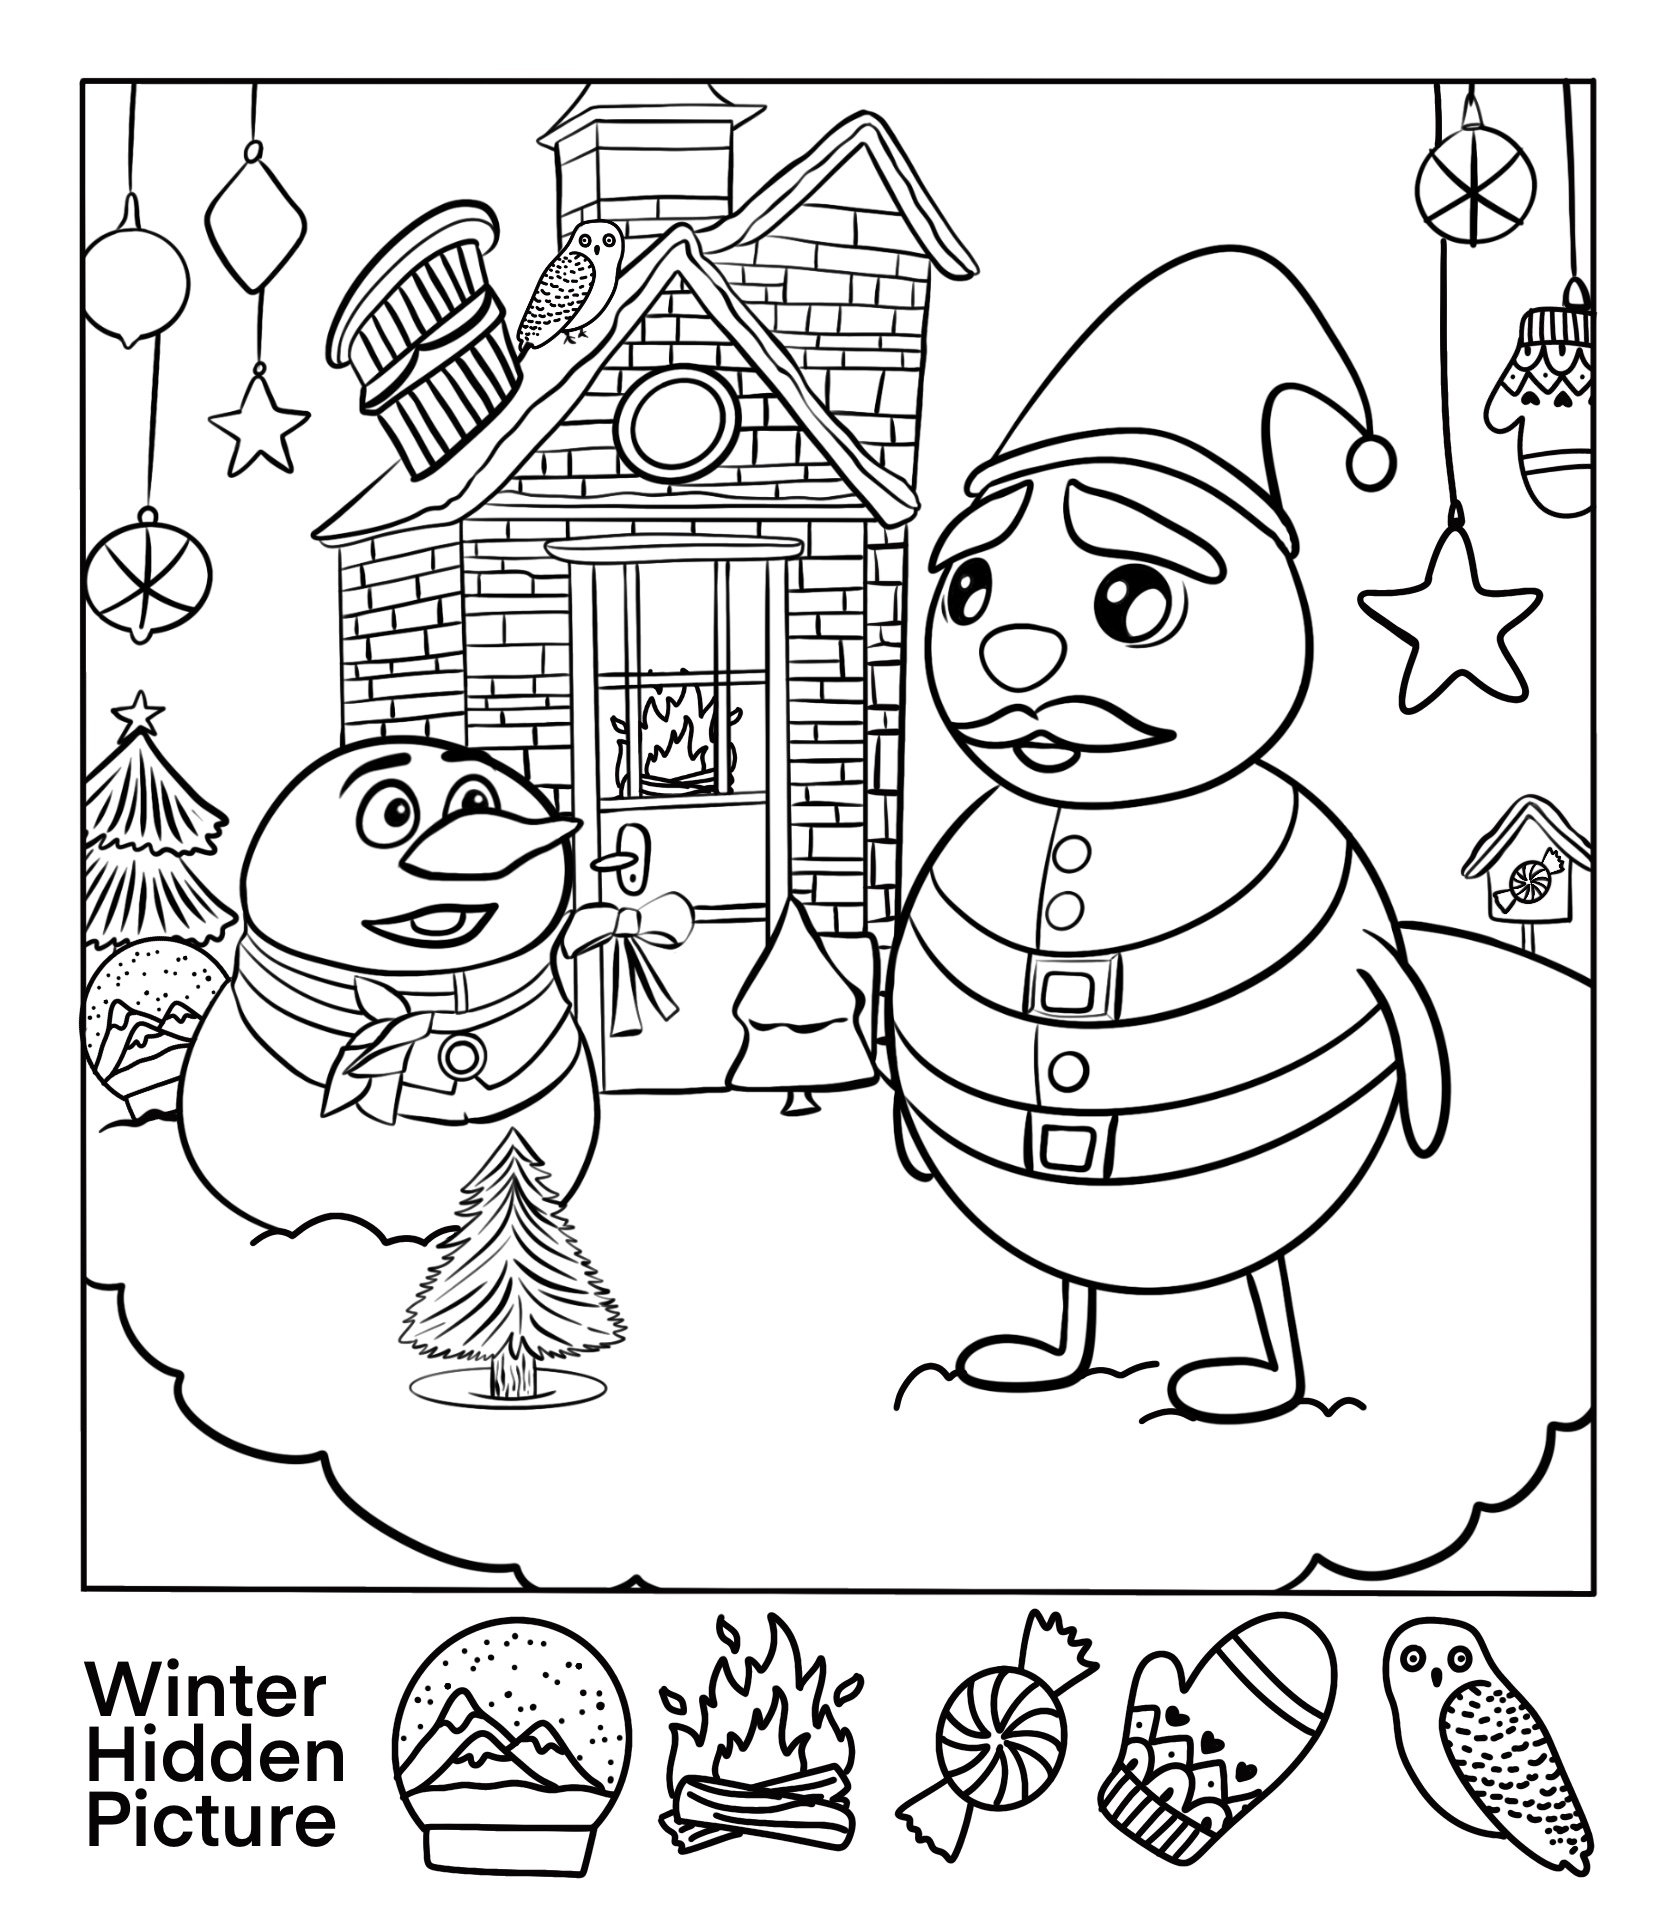 6 Best Images of Winter Hidden Objects Printables Free Printable